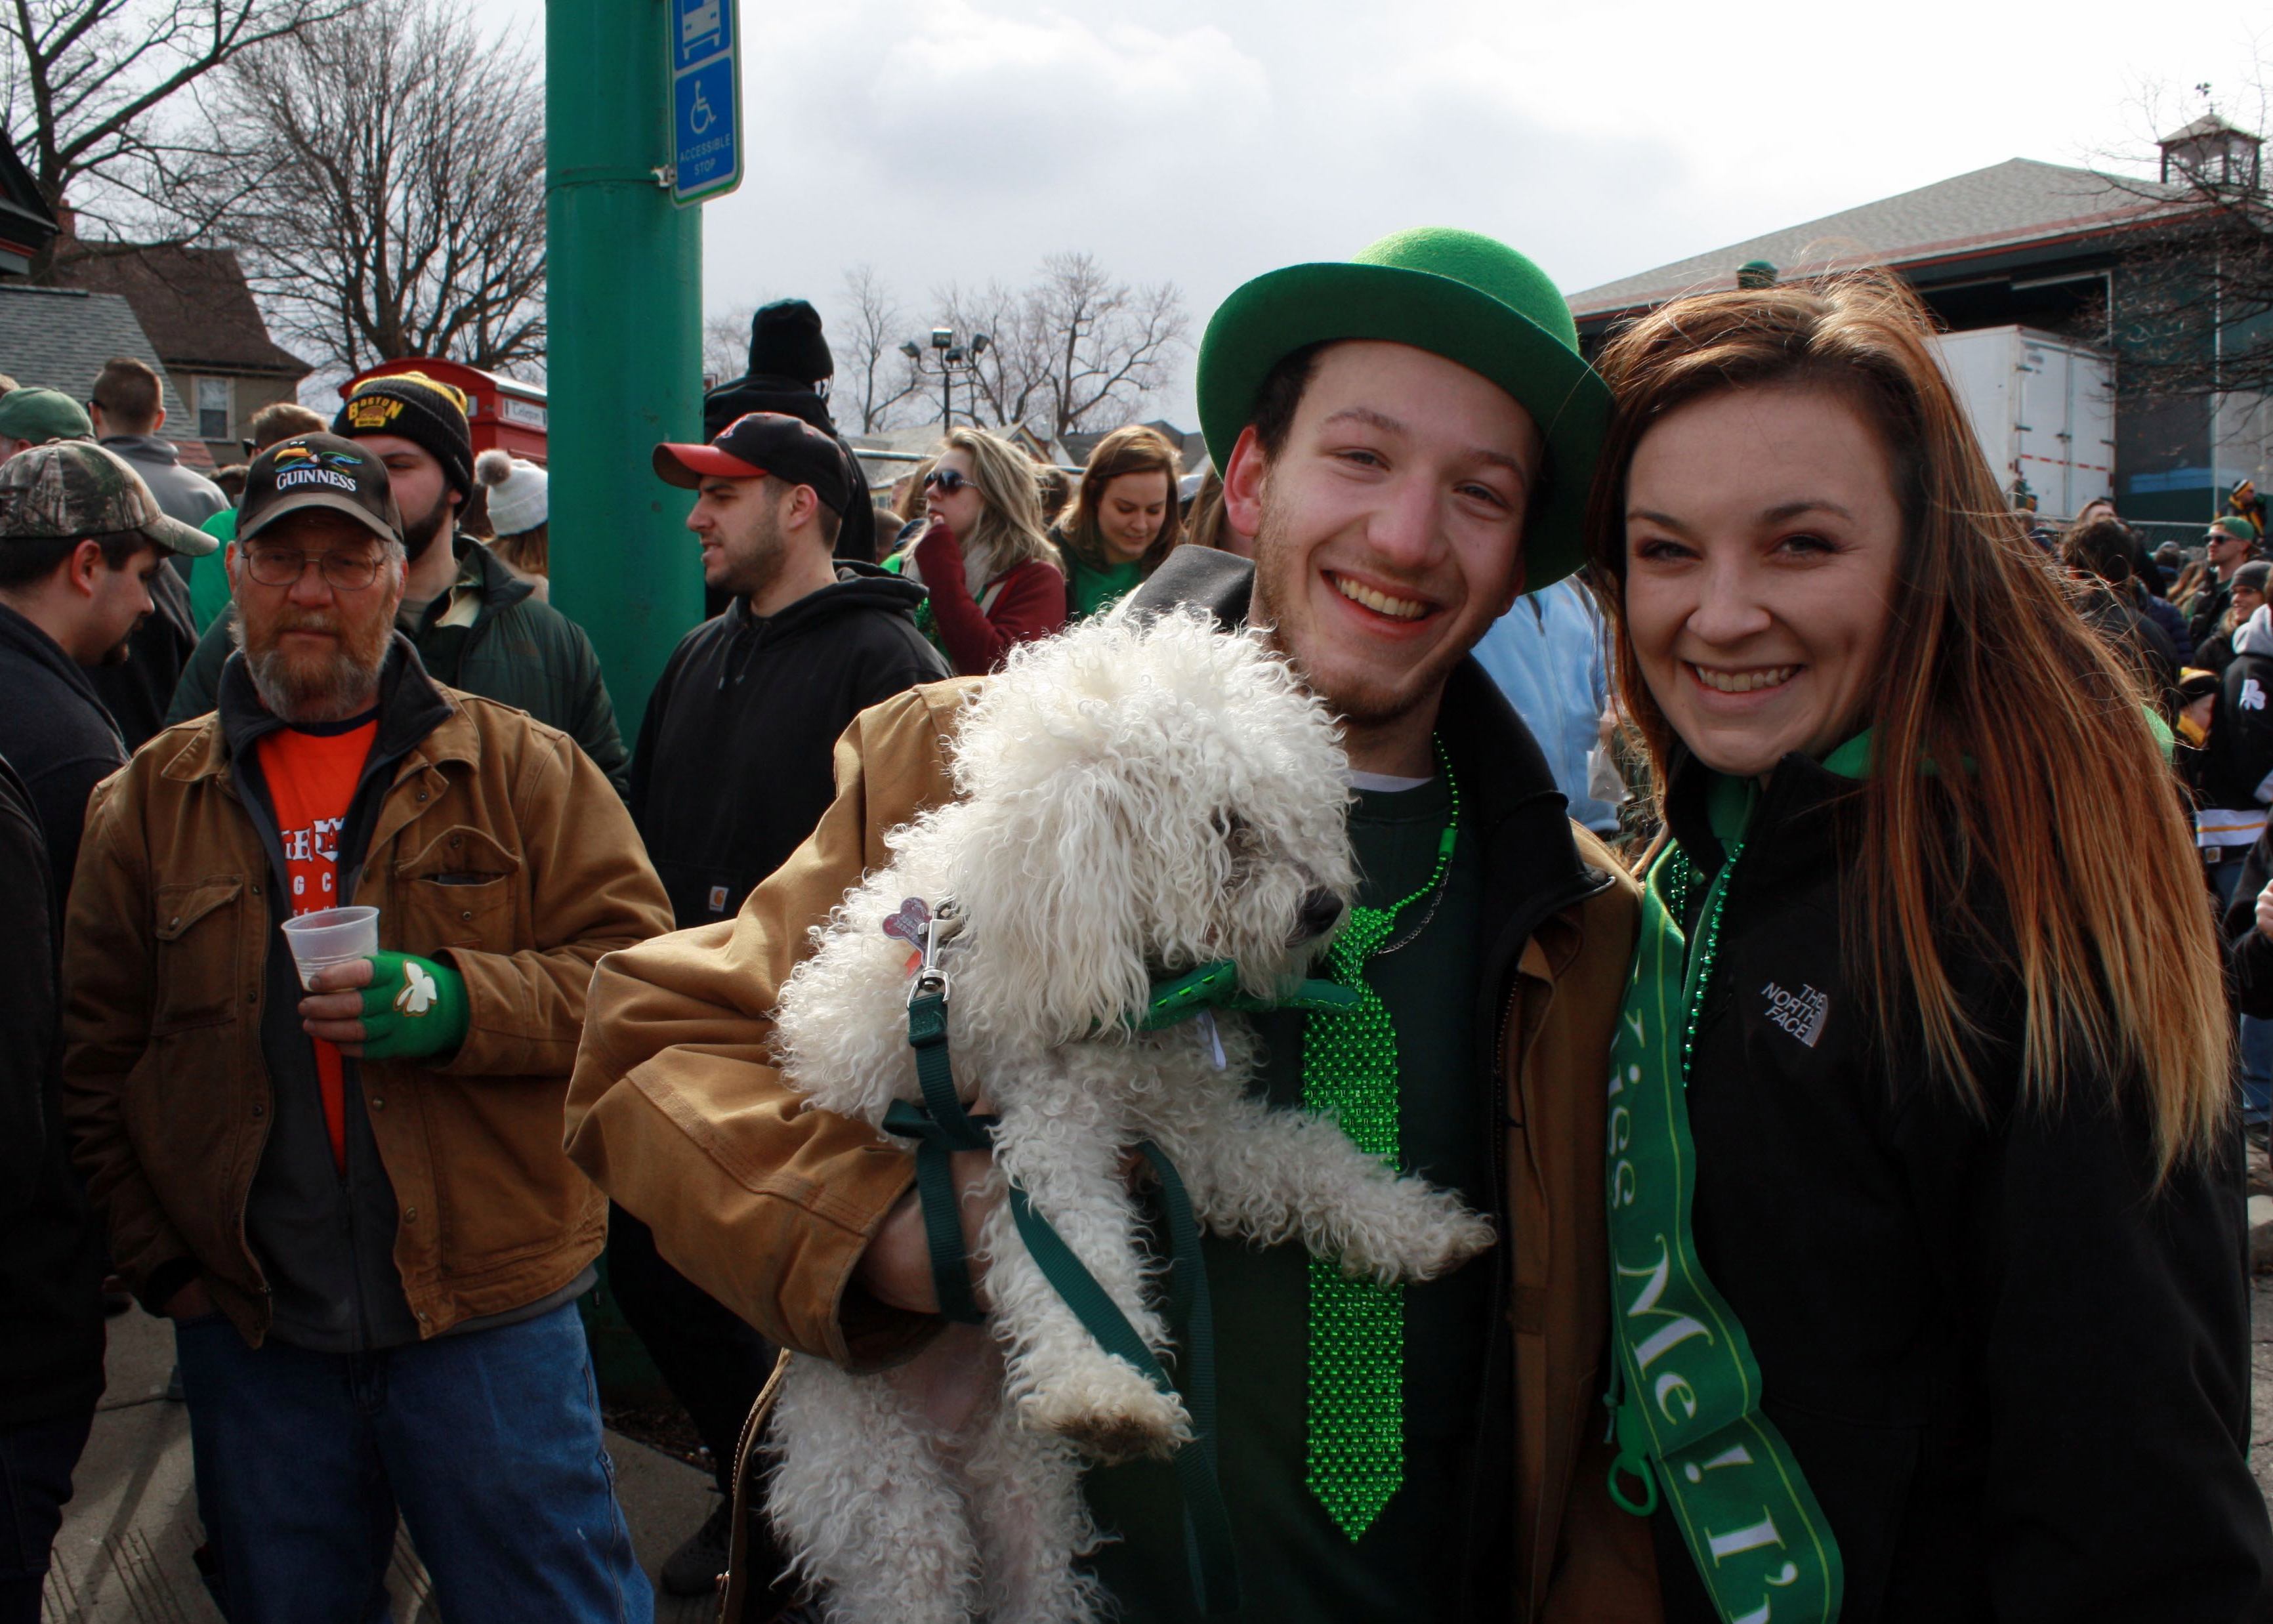 Katlyne’s McInytre’s family are regulars at Coleman’s, which provides the green beer, so she comes out every year. But at 21, this is the first year she can imbibe with her boyfriend Jordan Neliopowitz and dog Tucker.